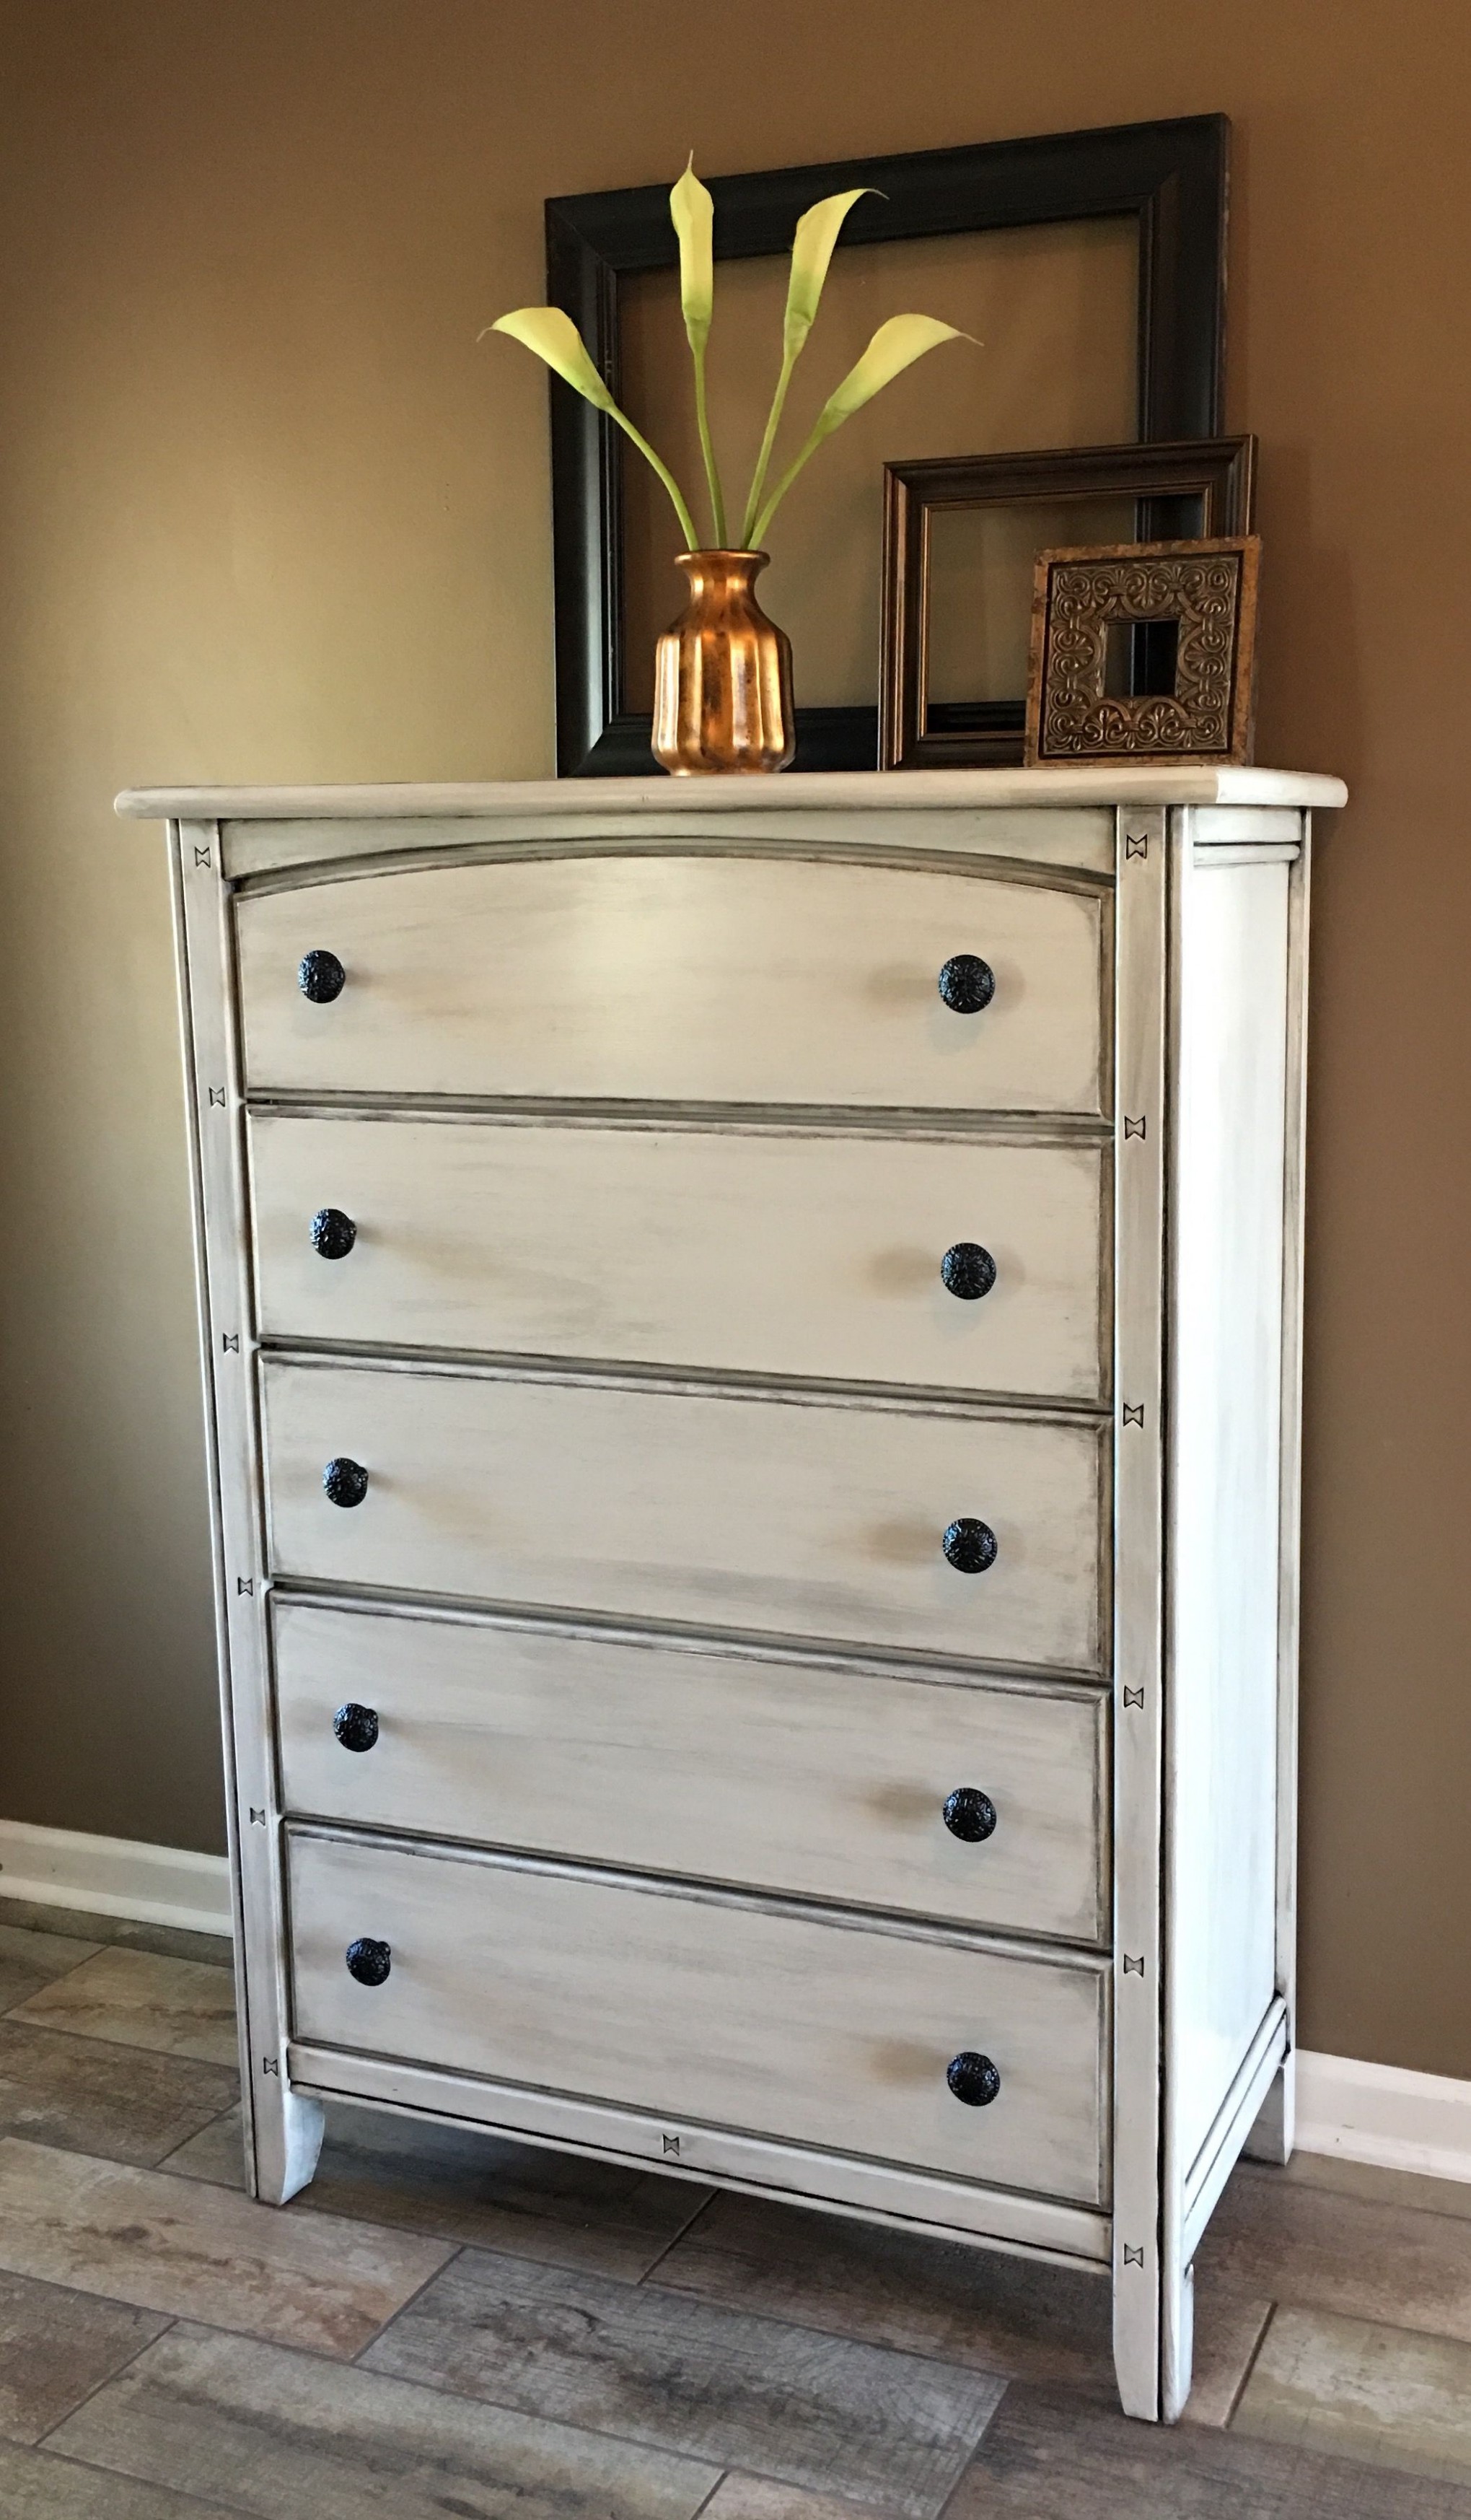 Pin On Re Find Refinishes Hobby Lobby Furniture Paint